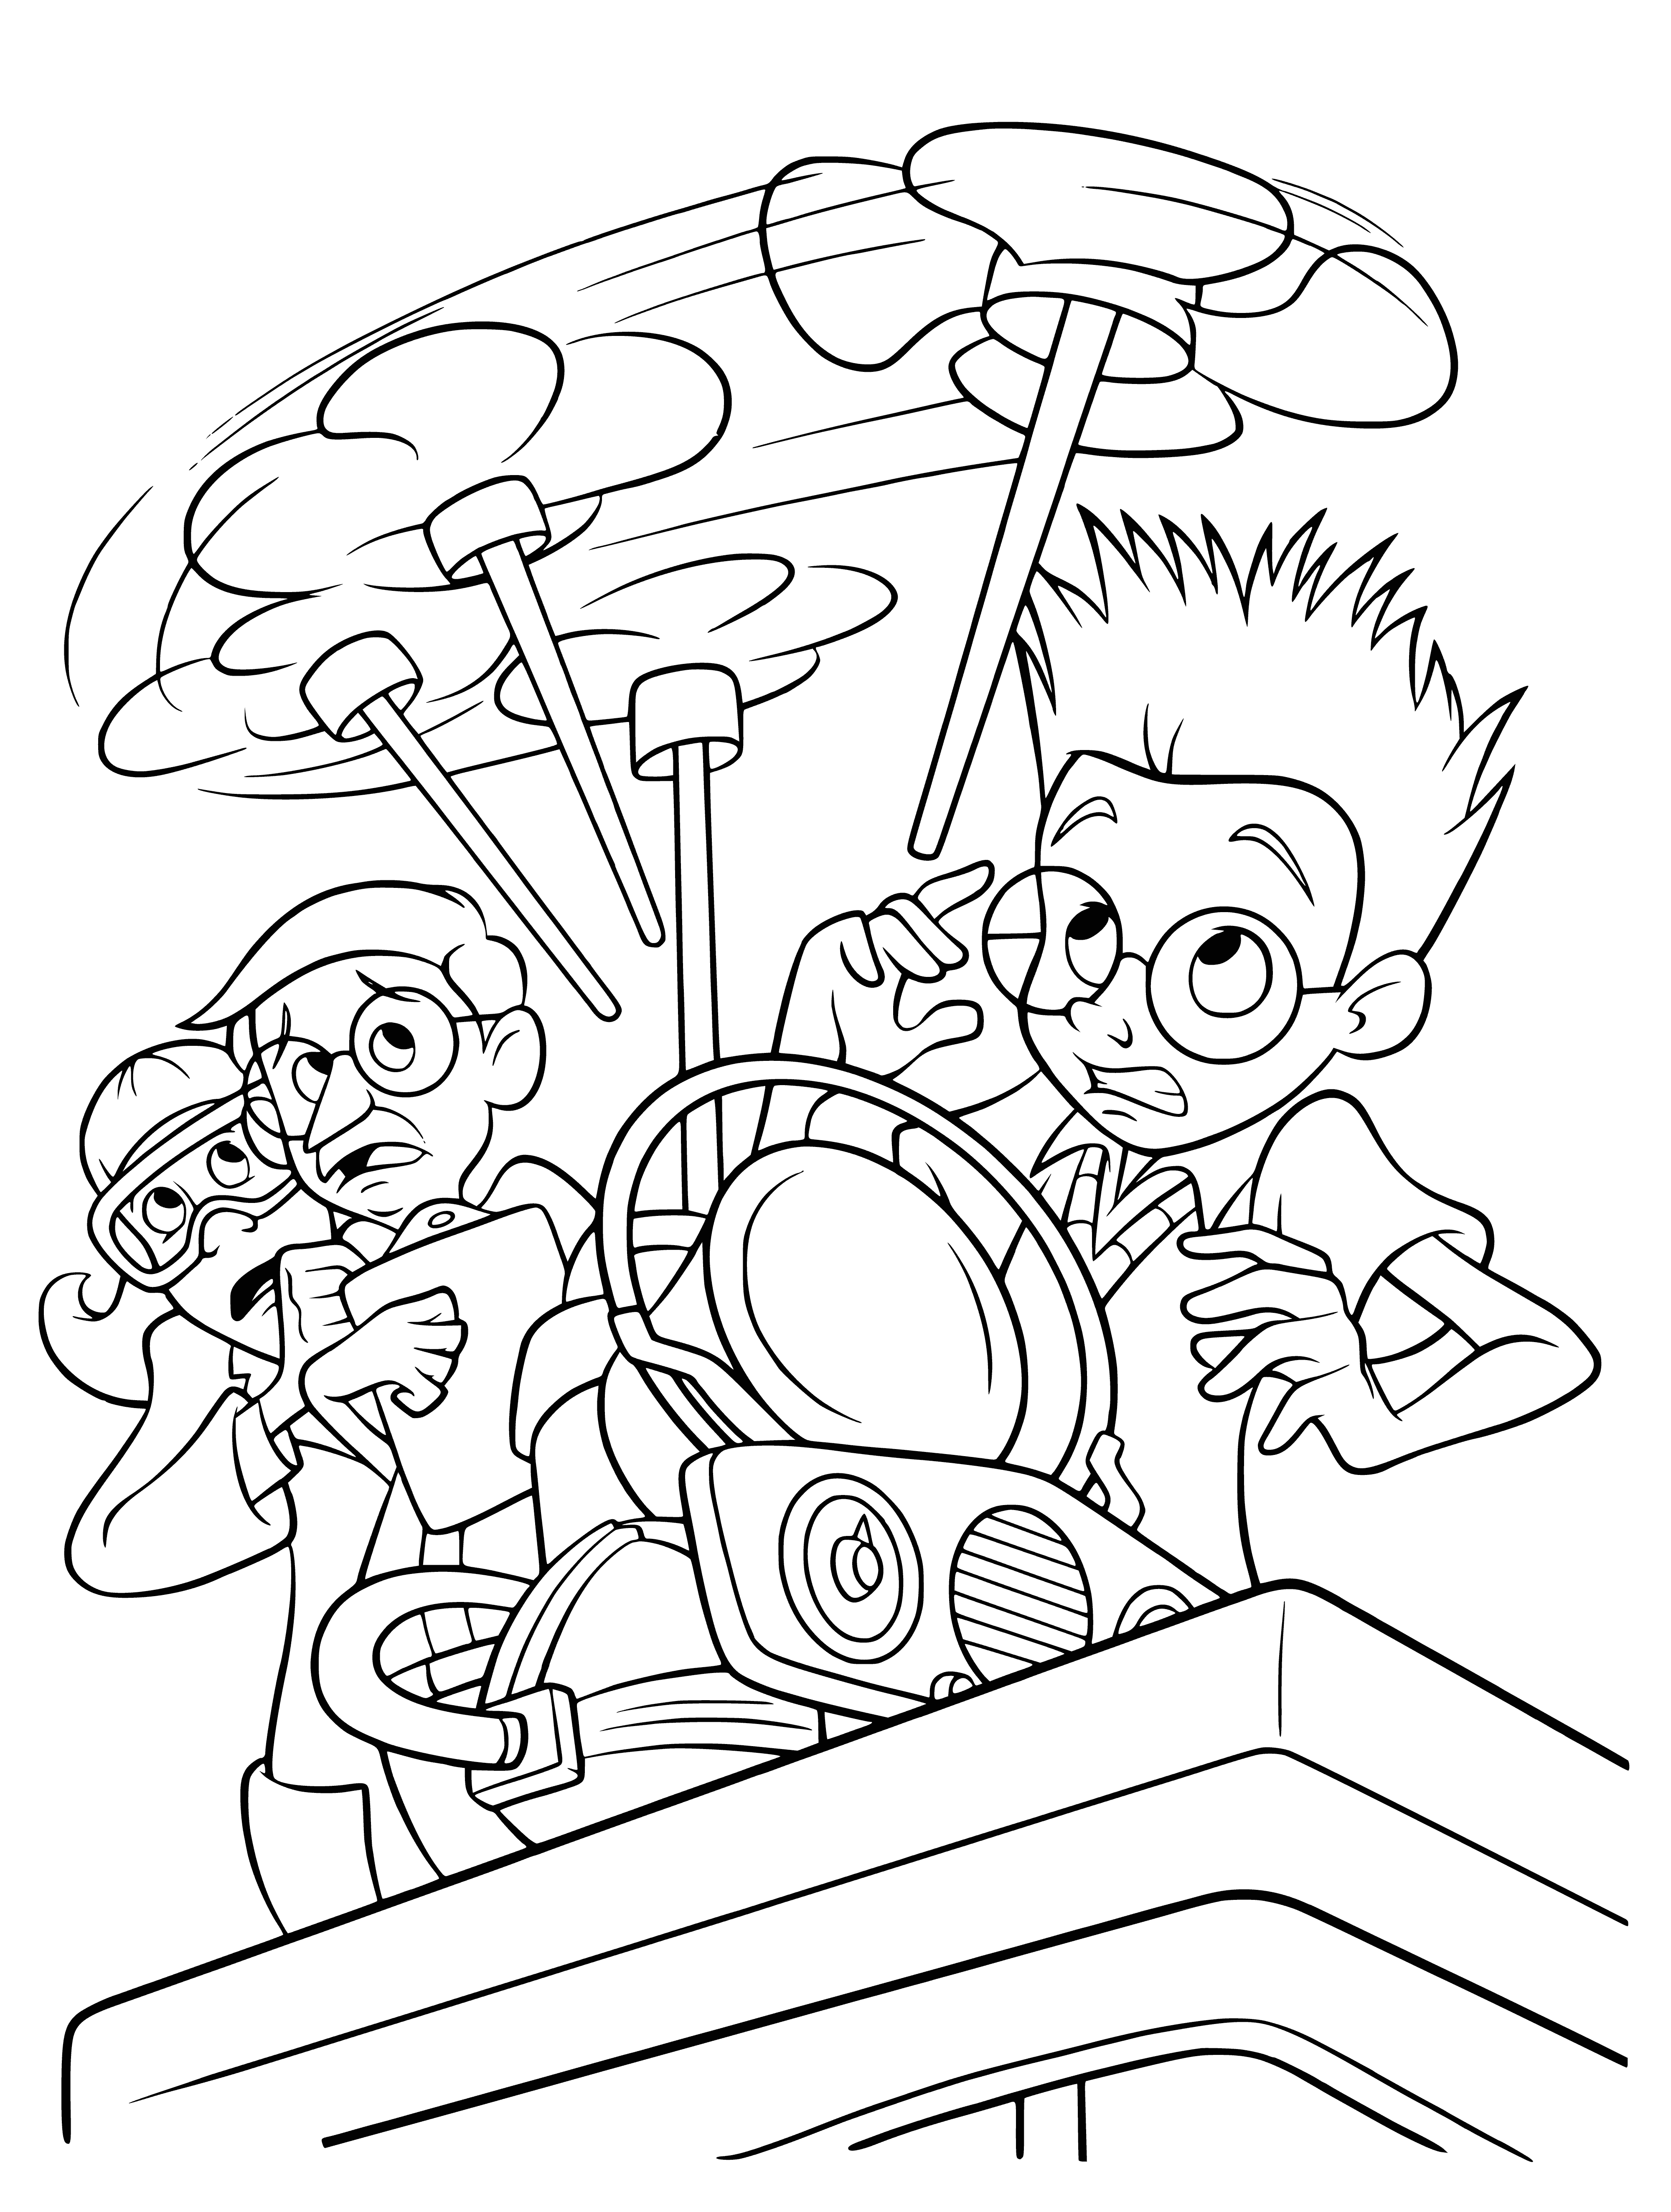 coloring page: Wilbur Robinson attempts to mend a machine, but finds it tough in scene from Meet the Robinsons.